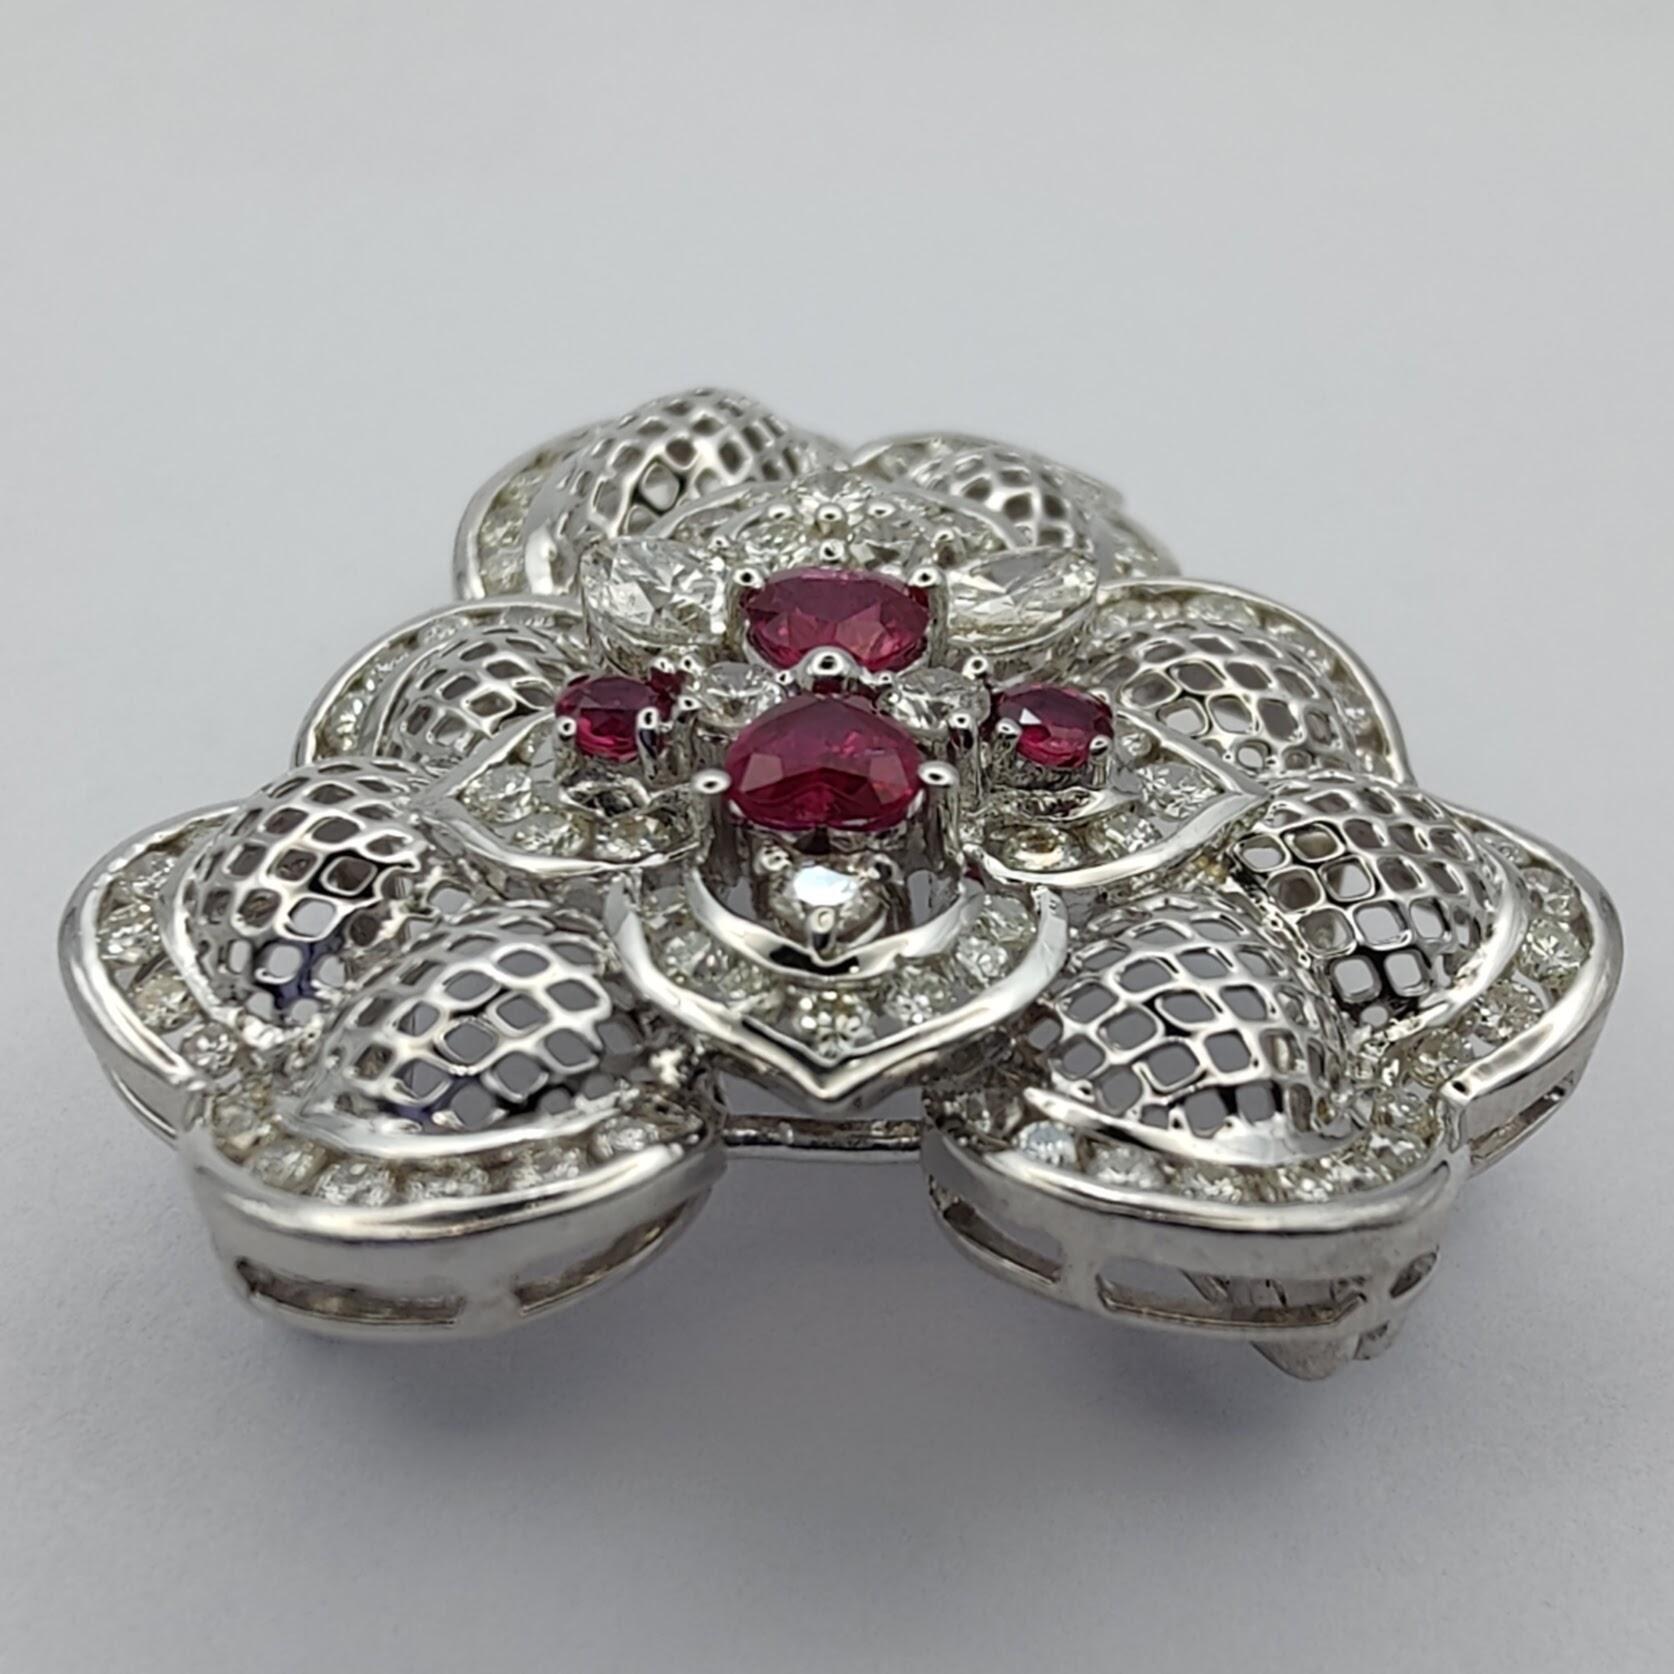 Baroque 0.78 Carat Ruby and 2.7 Carat Diamond Pendant Brooch in 18k White Gold In New Condition For Sale In Wan Chai District, HK